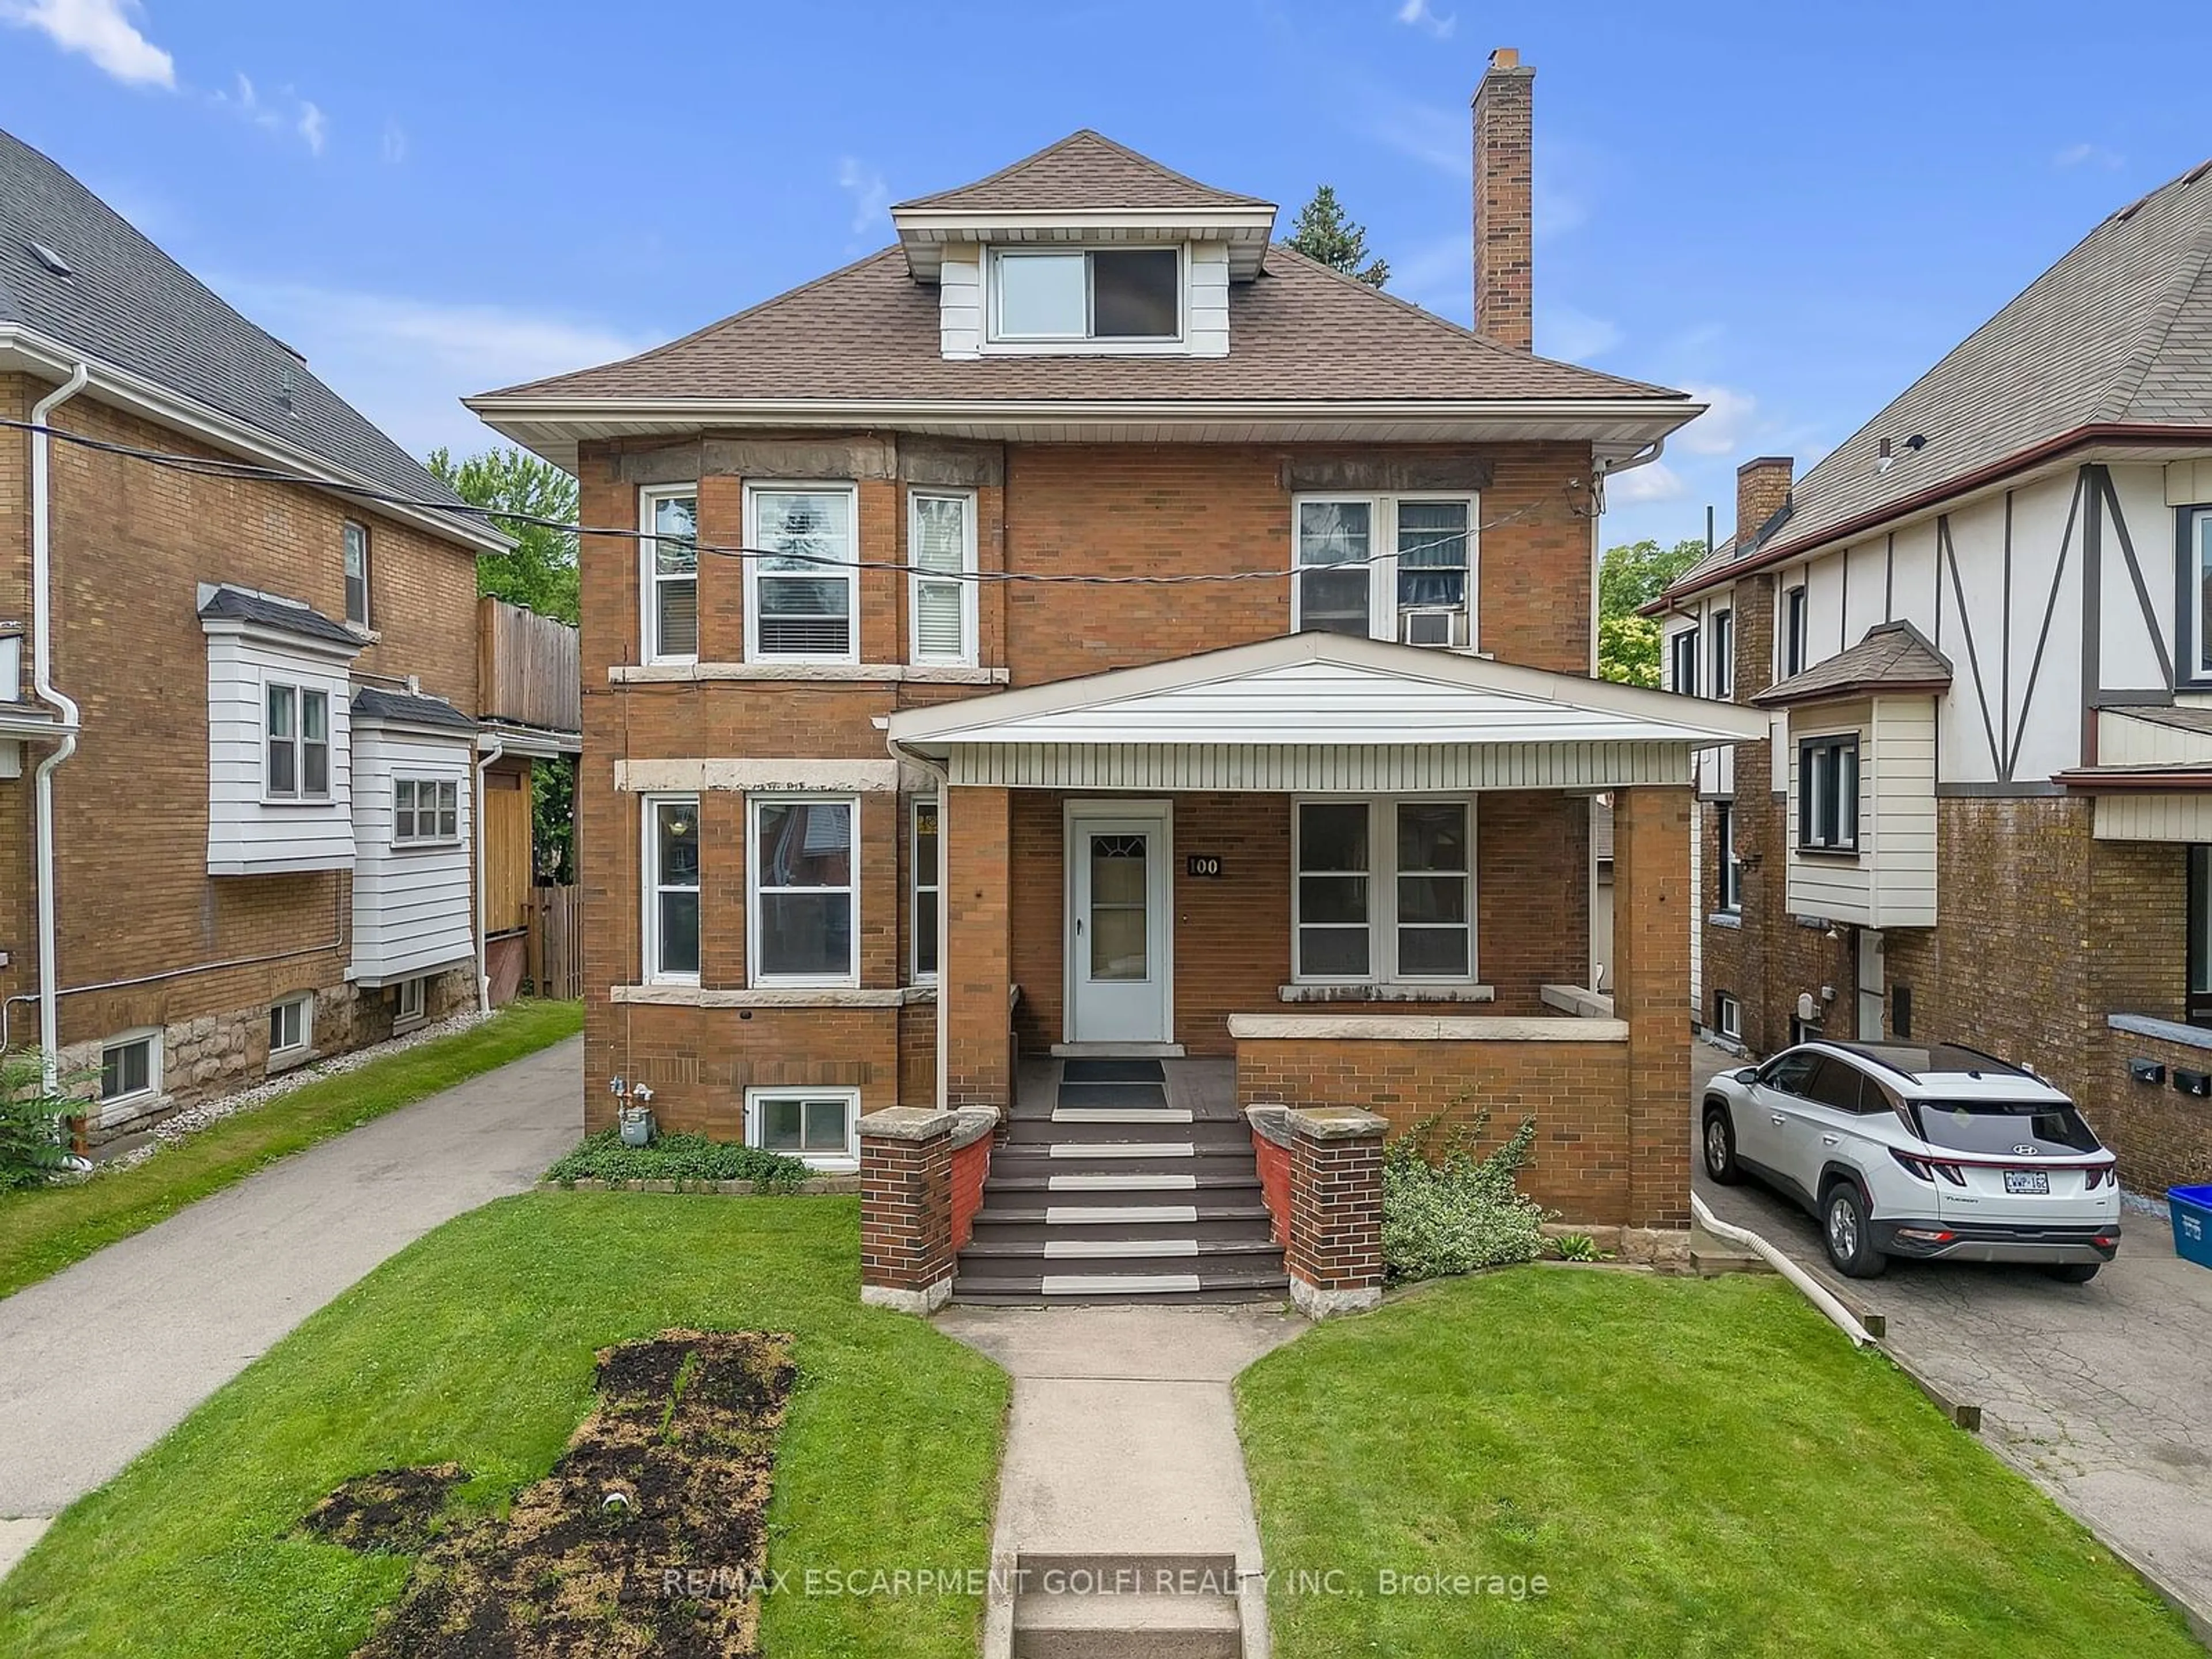 Frontside or backside of a home for 100 Balsam Ave, Hamilton Ontario L8M 3B3